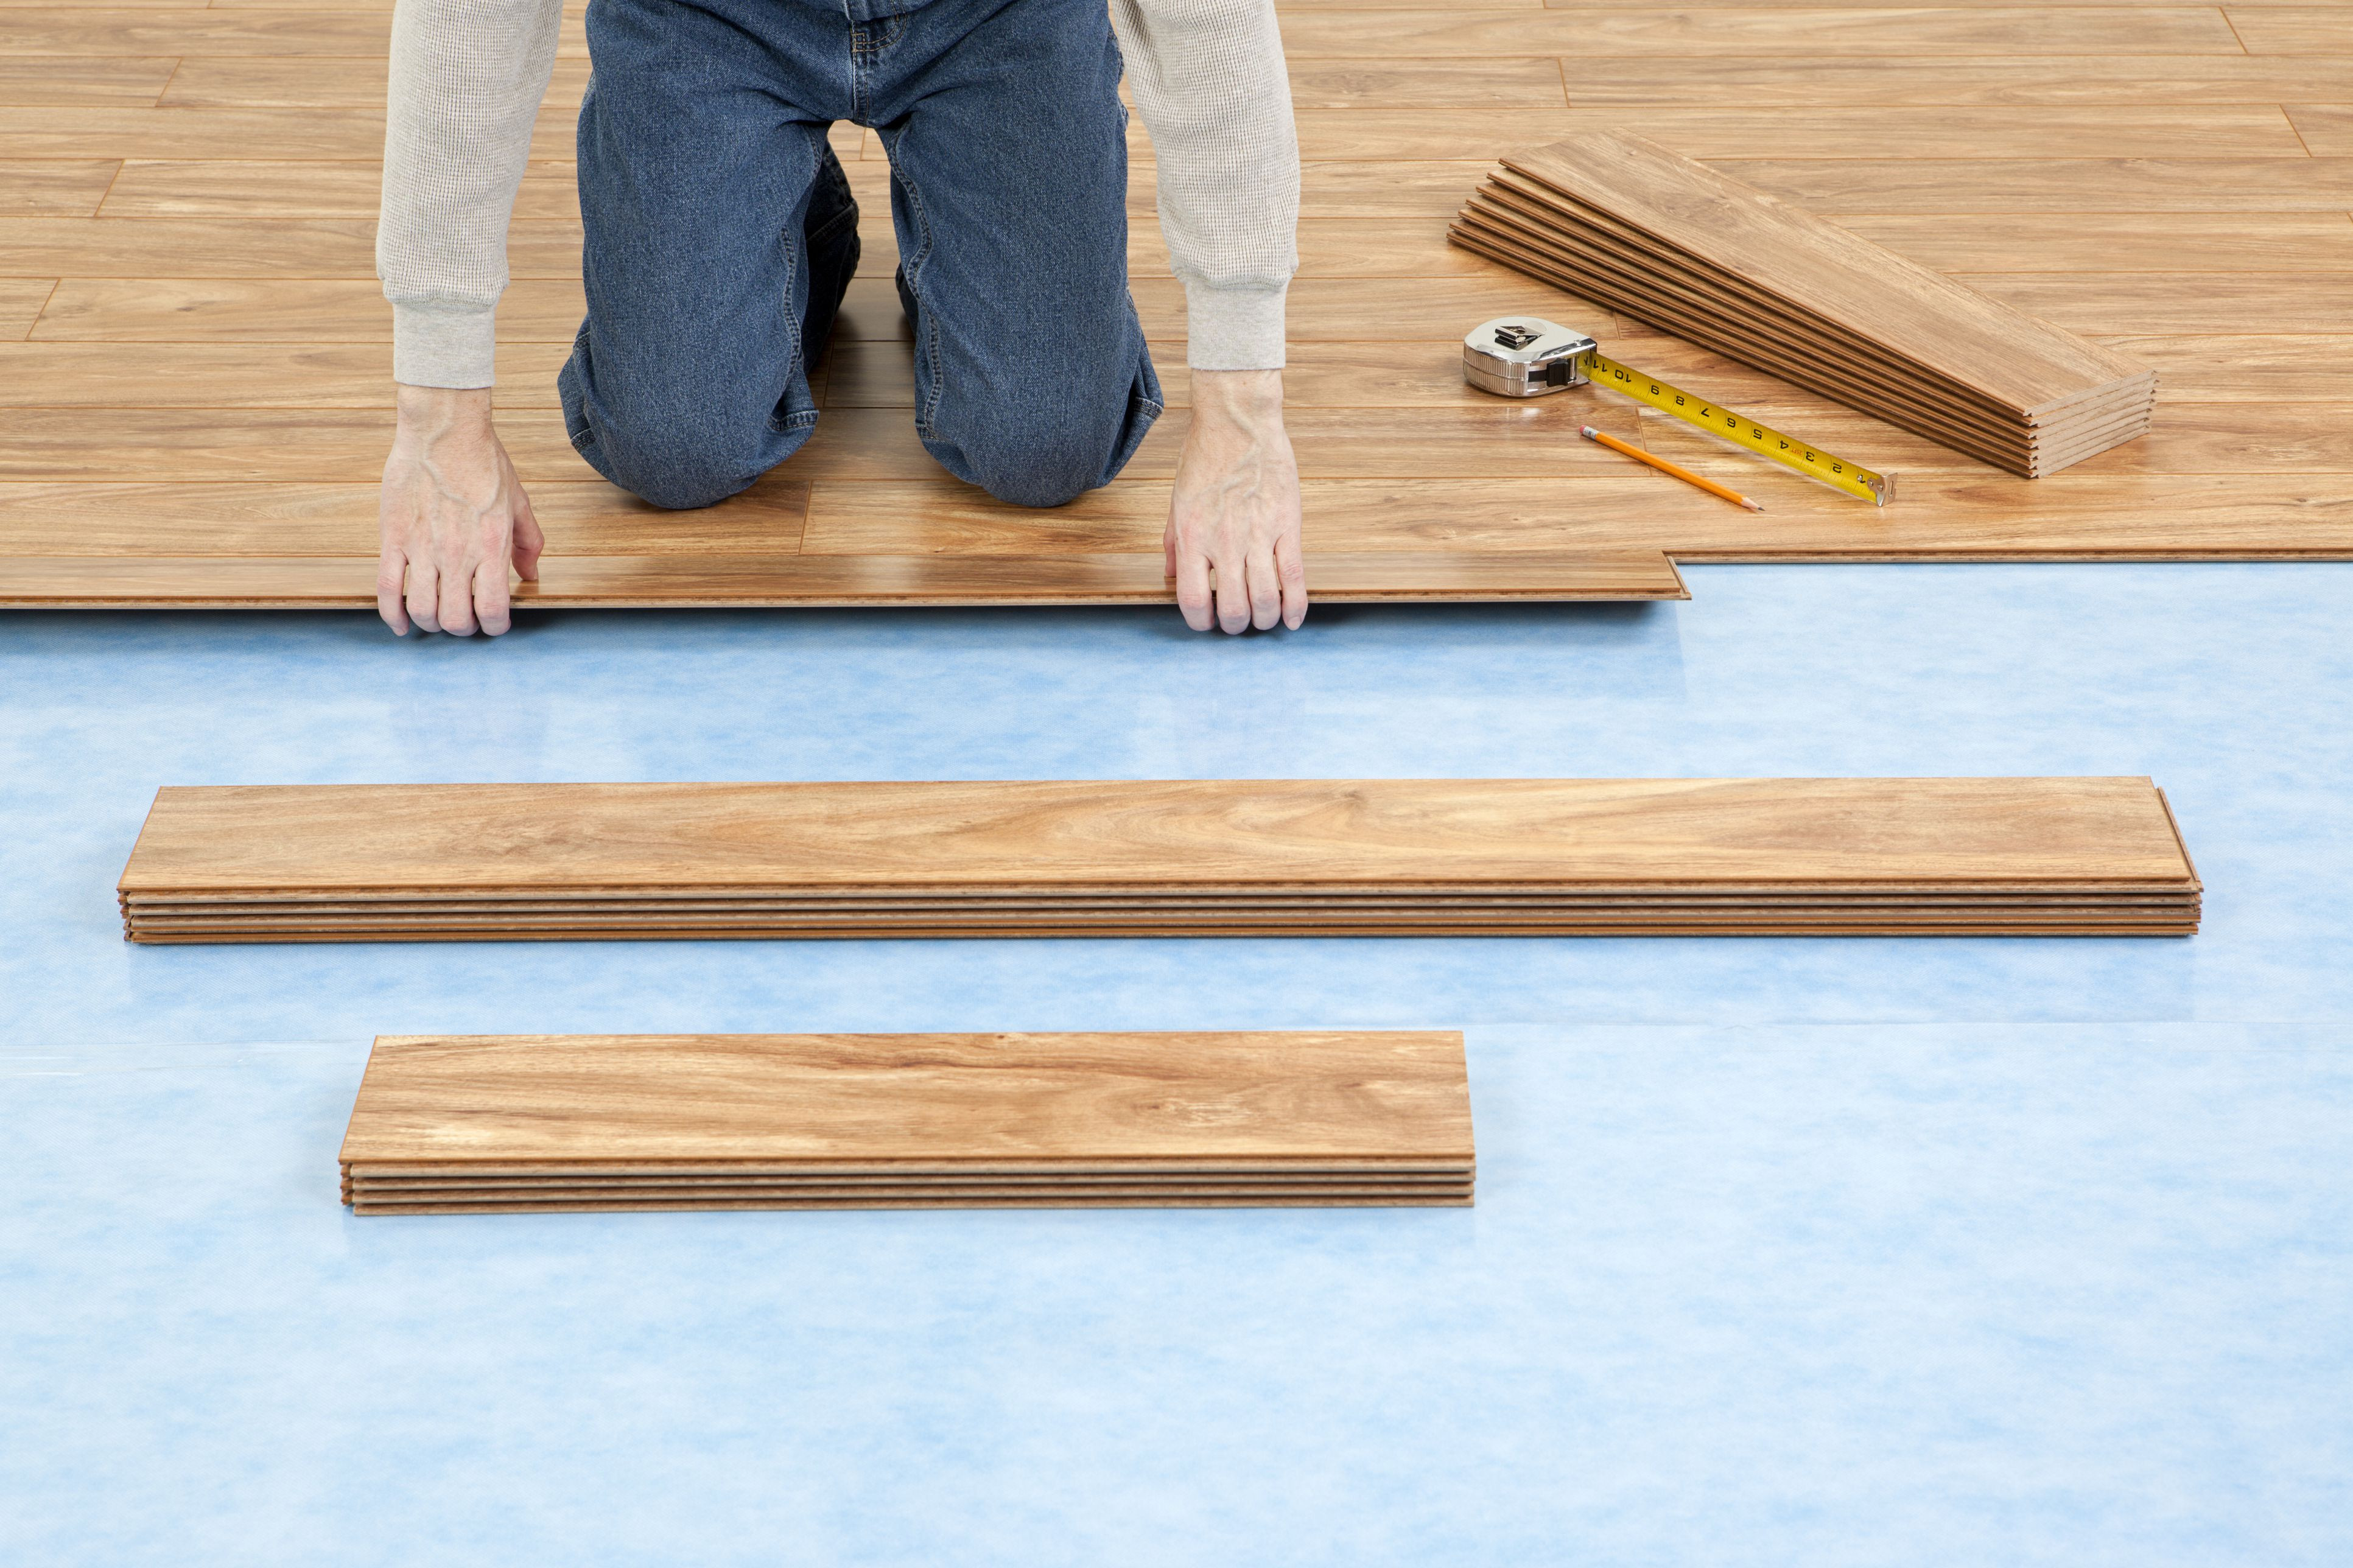 17 Stunning Best Hardwood Floor Installers Near Me 2024 free download best hardwood floor installers near me of installing laminate flooring with attached underlayment intended for new floor installation 155283725 582735c03df78c6f6af8ac80